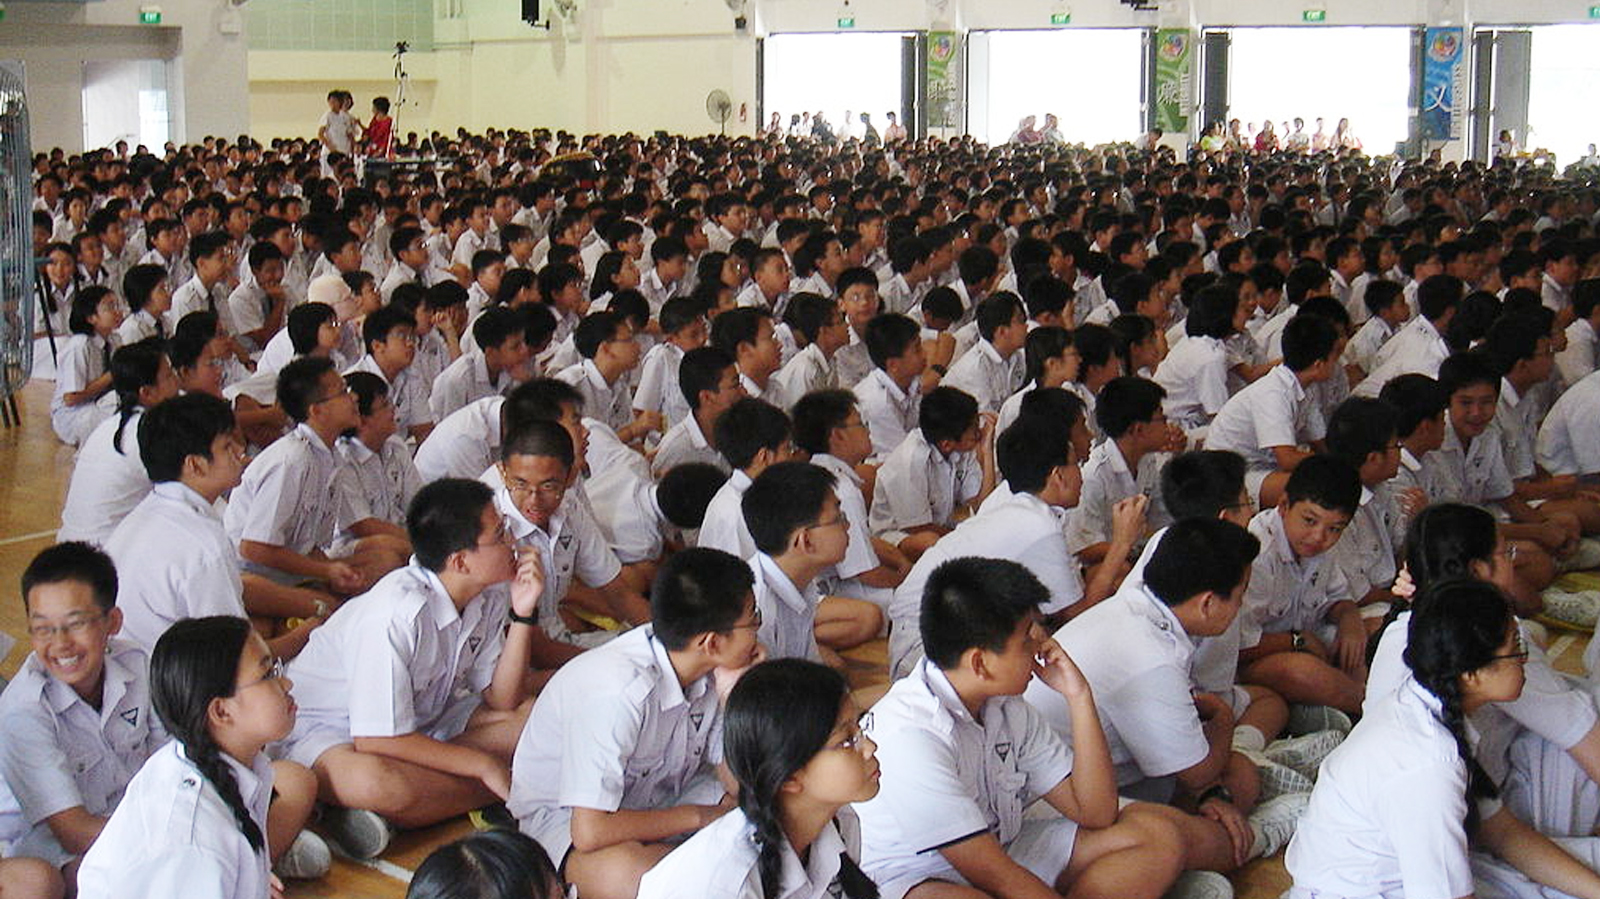 Parents, leave the school to discipline students